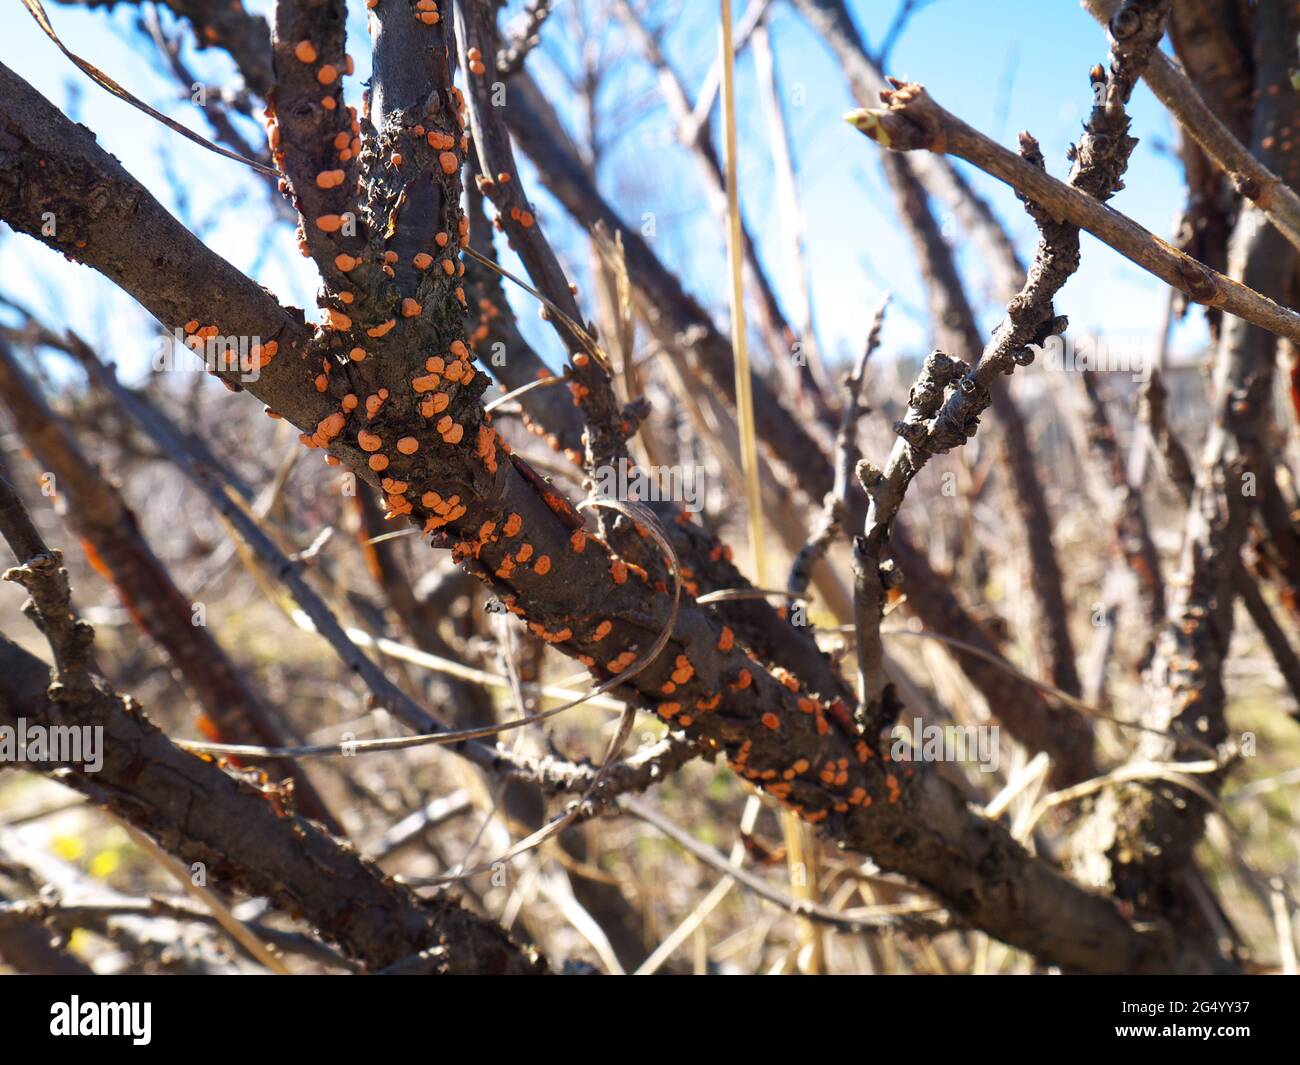 diseased currant branch with coral spots on it, shallow depth of field Stock Photo